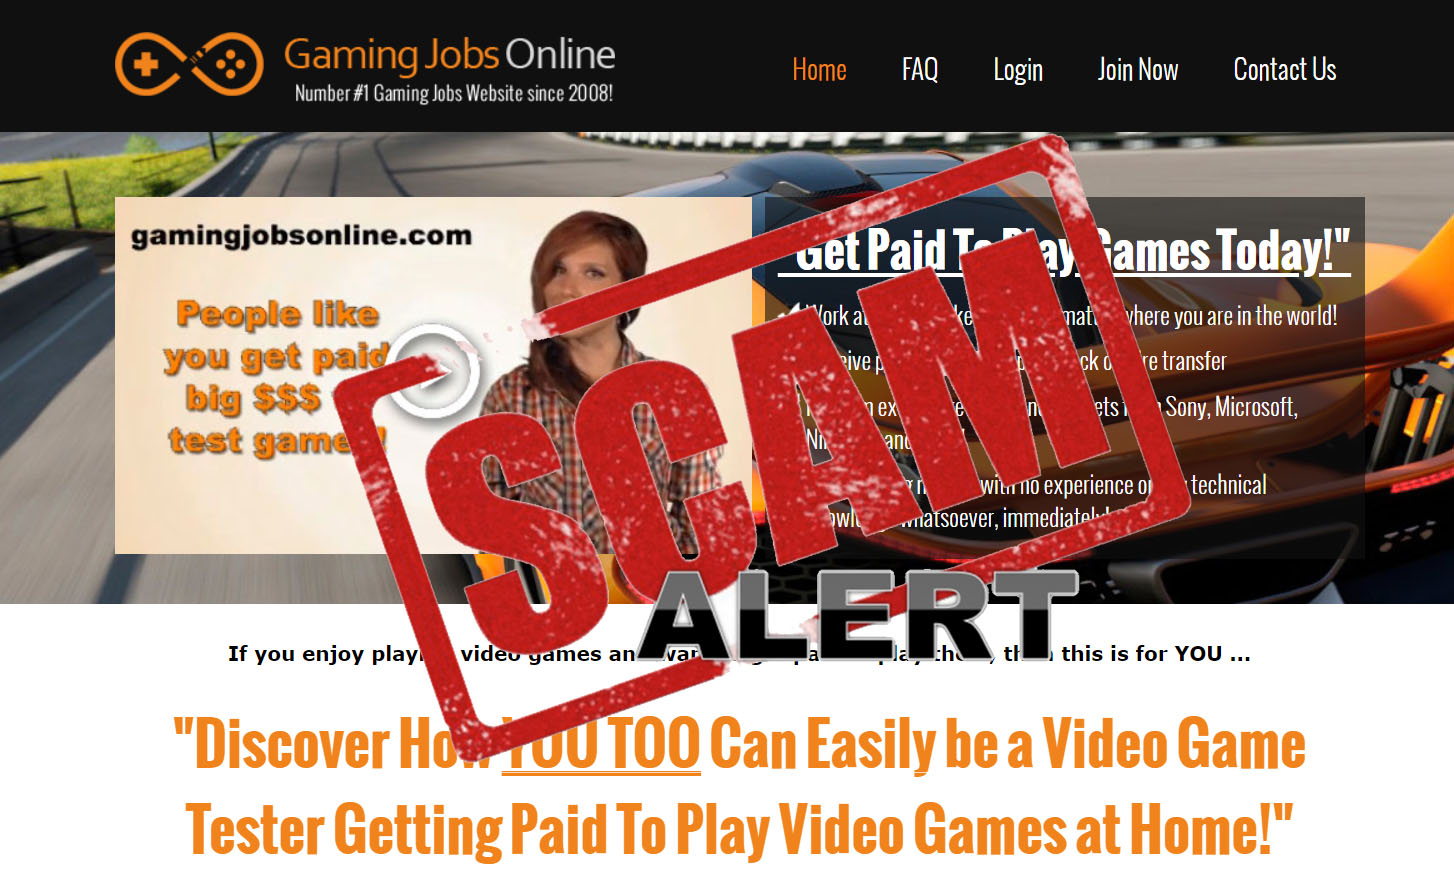 gaming jobs online review